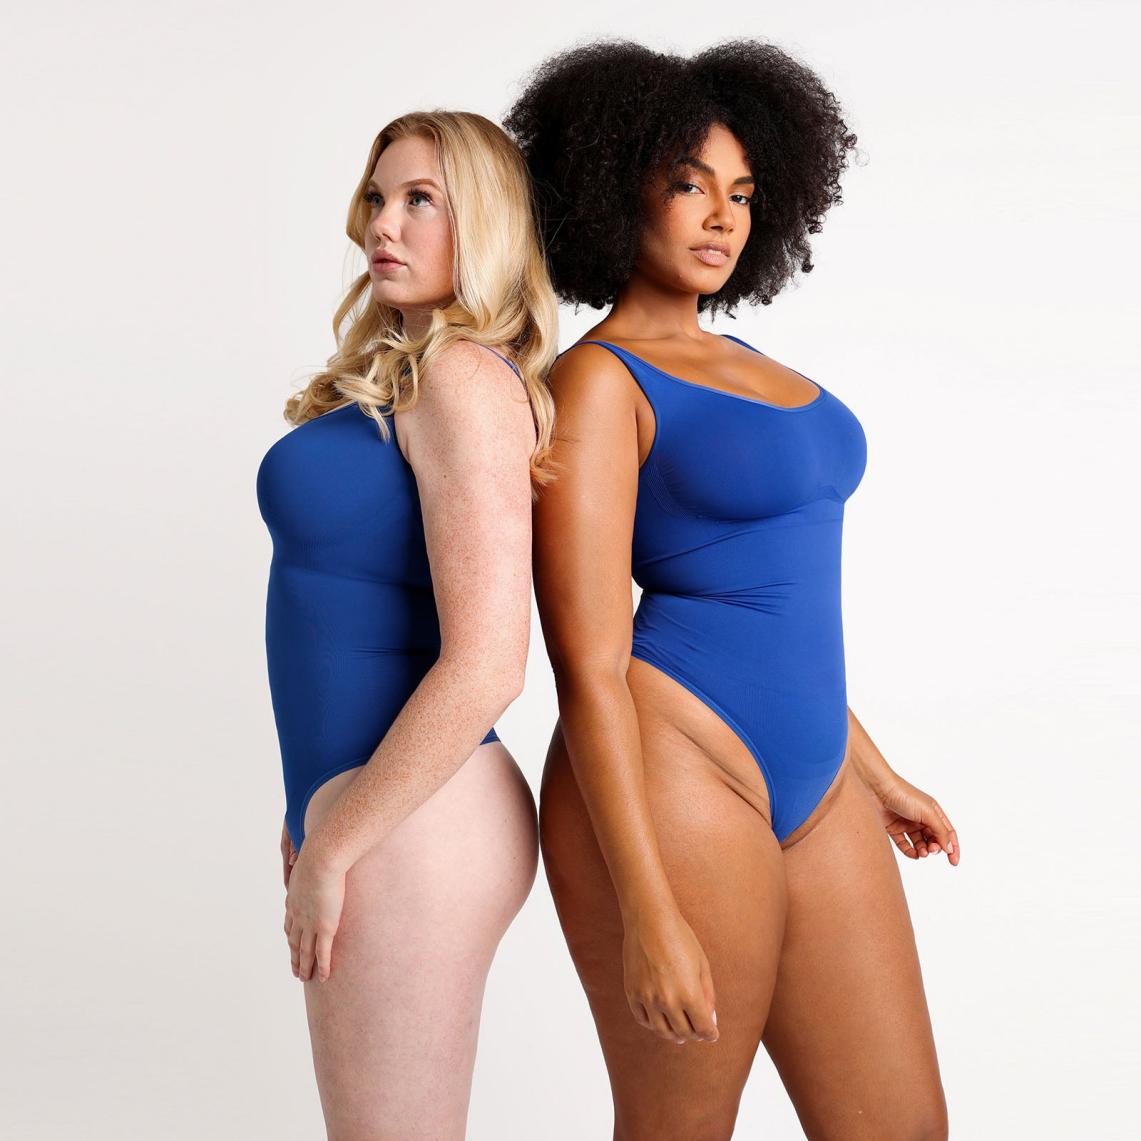 Shapellx Review: What You Should Know About the Brand and Shapewear